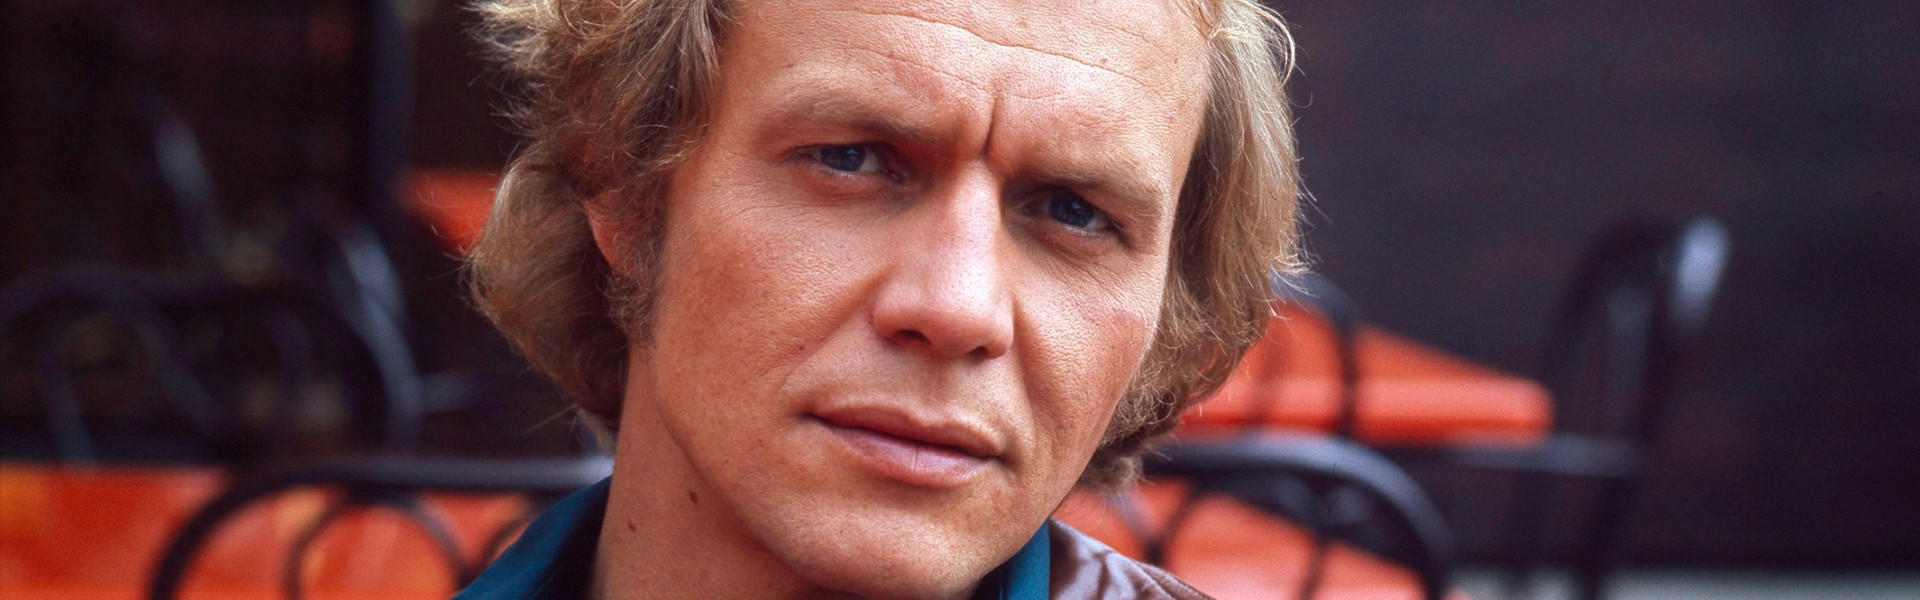 David Soul, Detective Hutch from the cult TV series “Starsky & Hutch,” has passed away